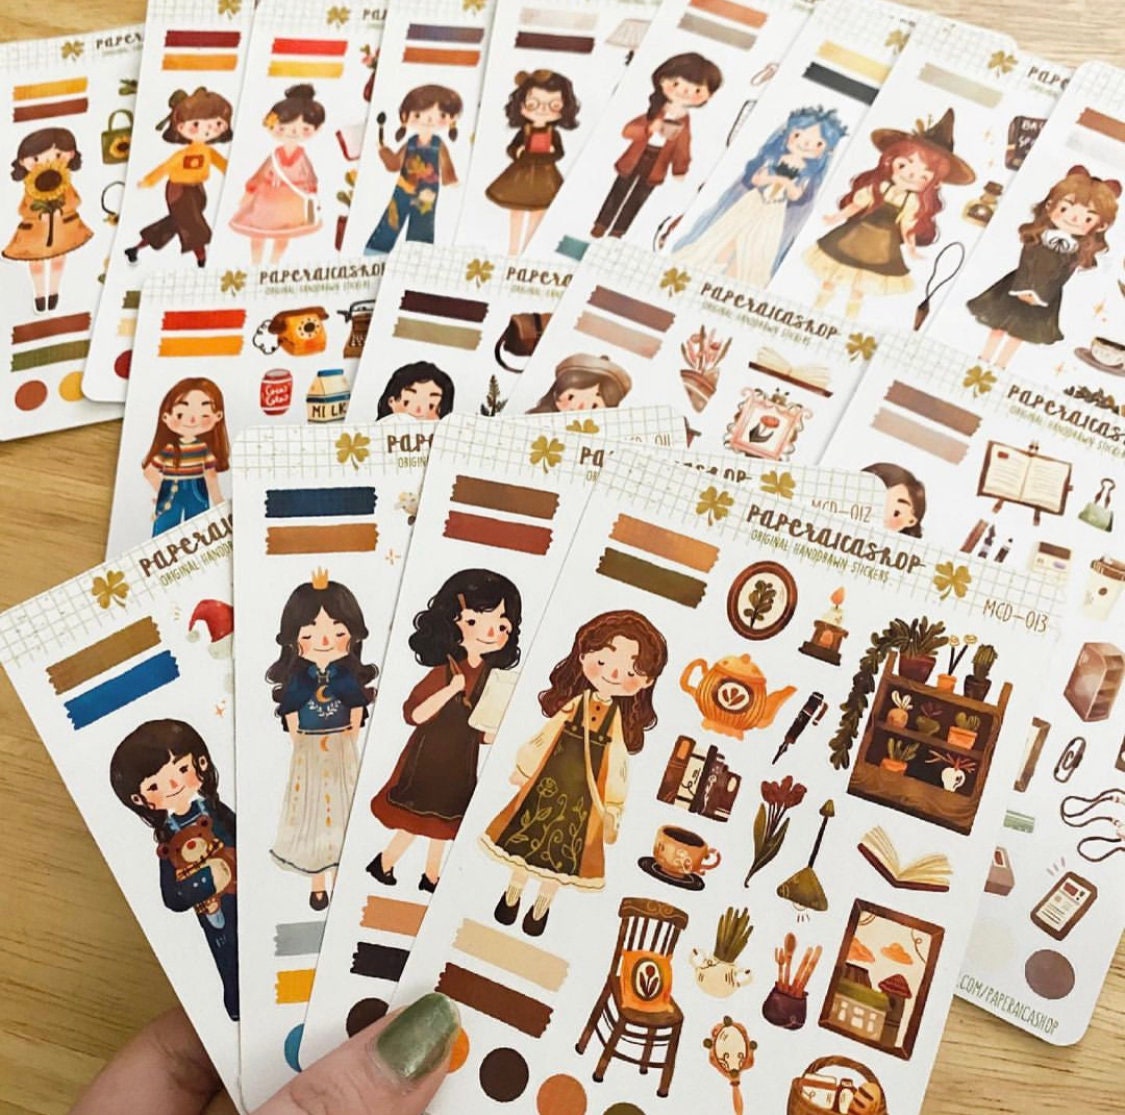 Cottagecore Cozy Sticker Sheet – together @withkx